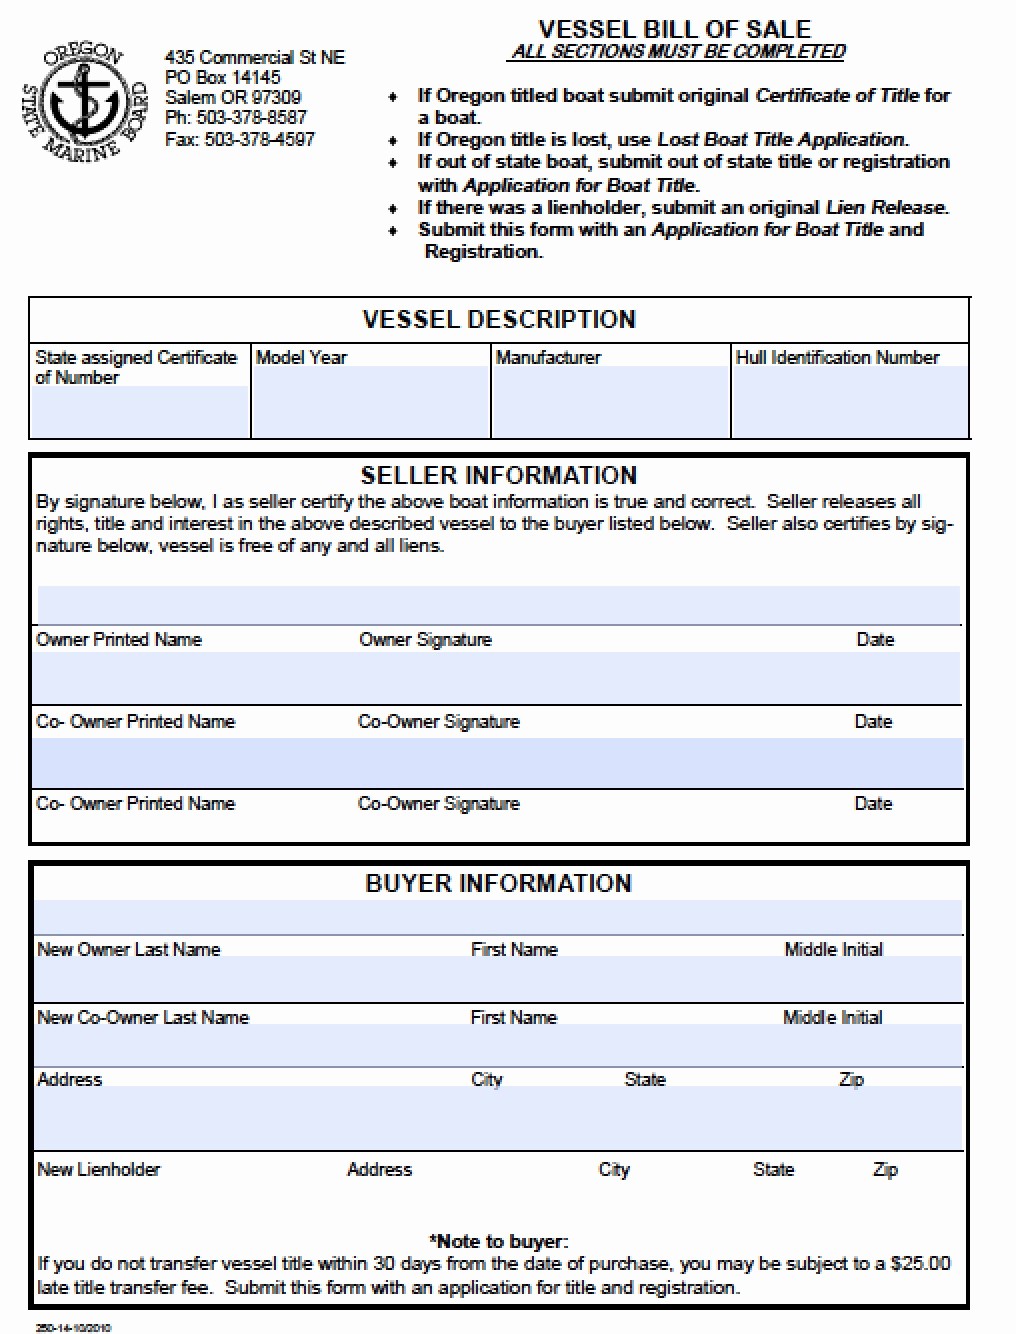 Form Of Bill Of Sale Awesome Free oregon Boat Vessel Bill Of Sale form Pdf